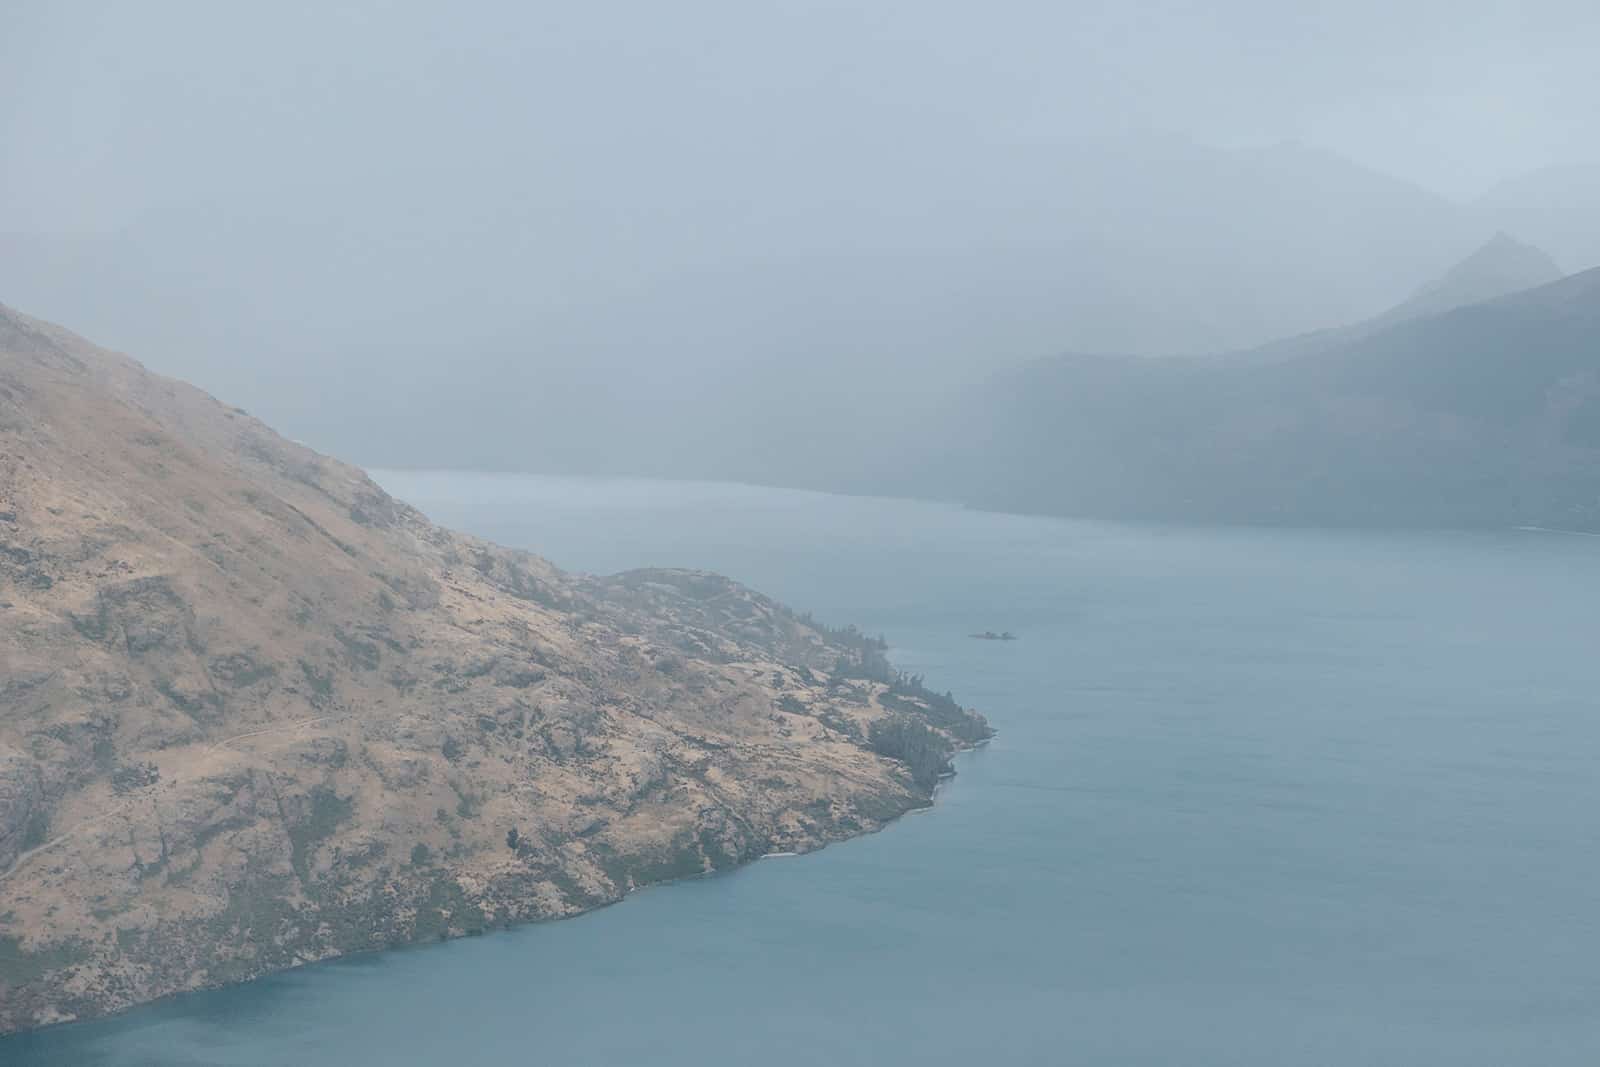 Queenstown on a moody day